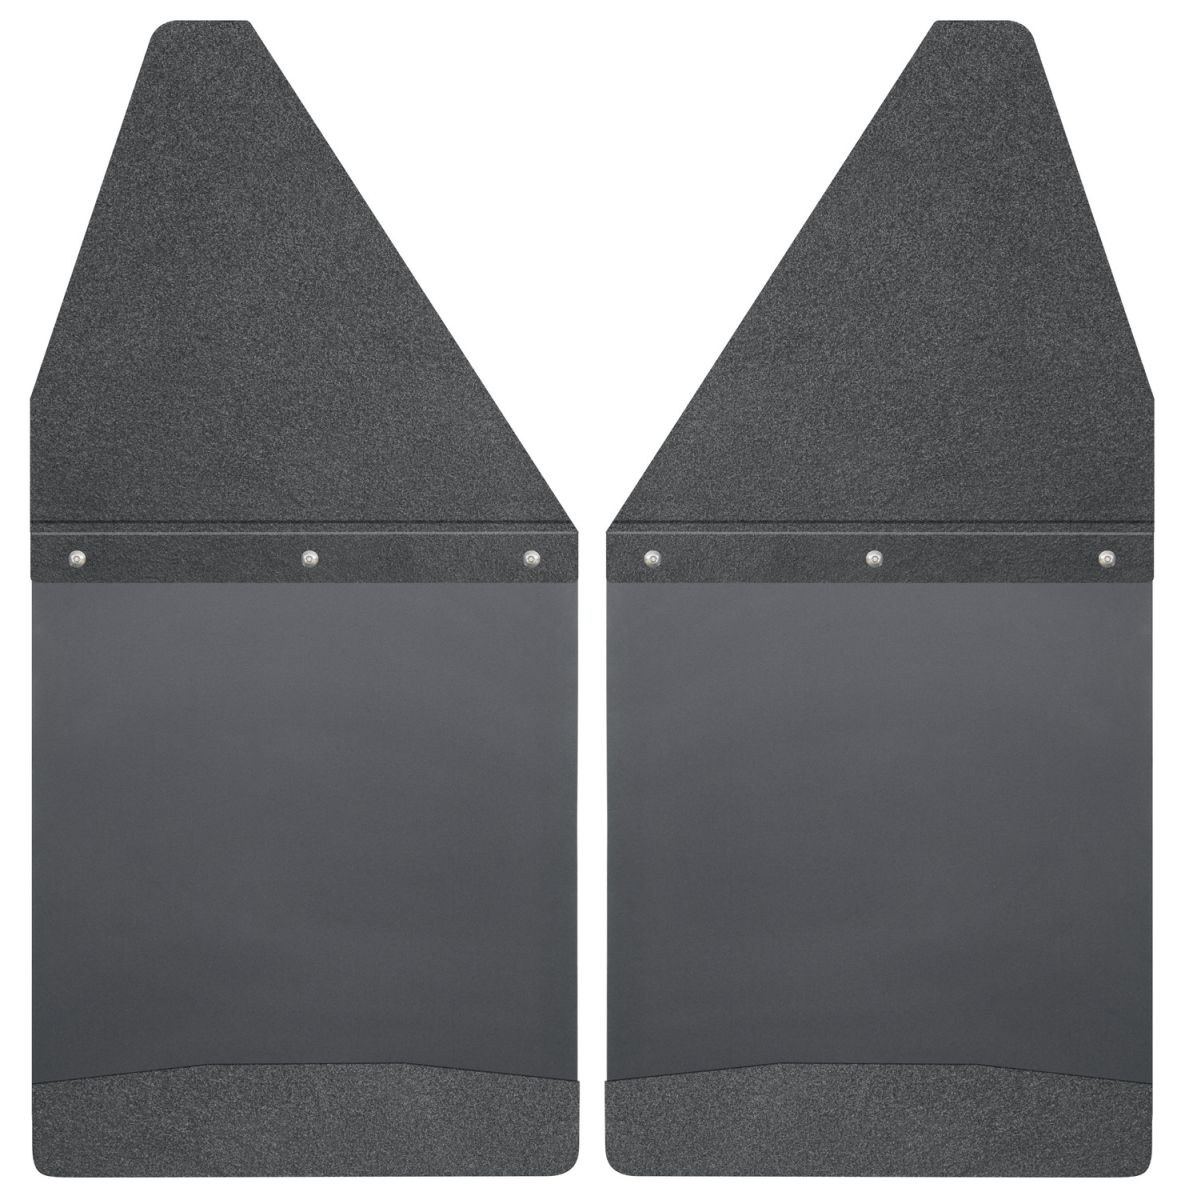 Husky Liners - Husky Liners Kick Back Mud Flaps Front 12" Wide Black Top and Black Weight Chevy/Dodge 17101